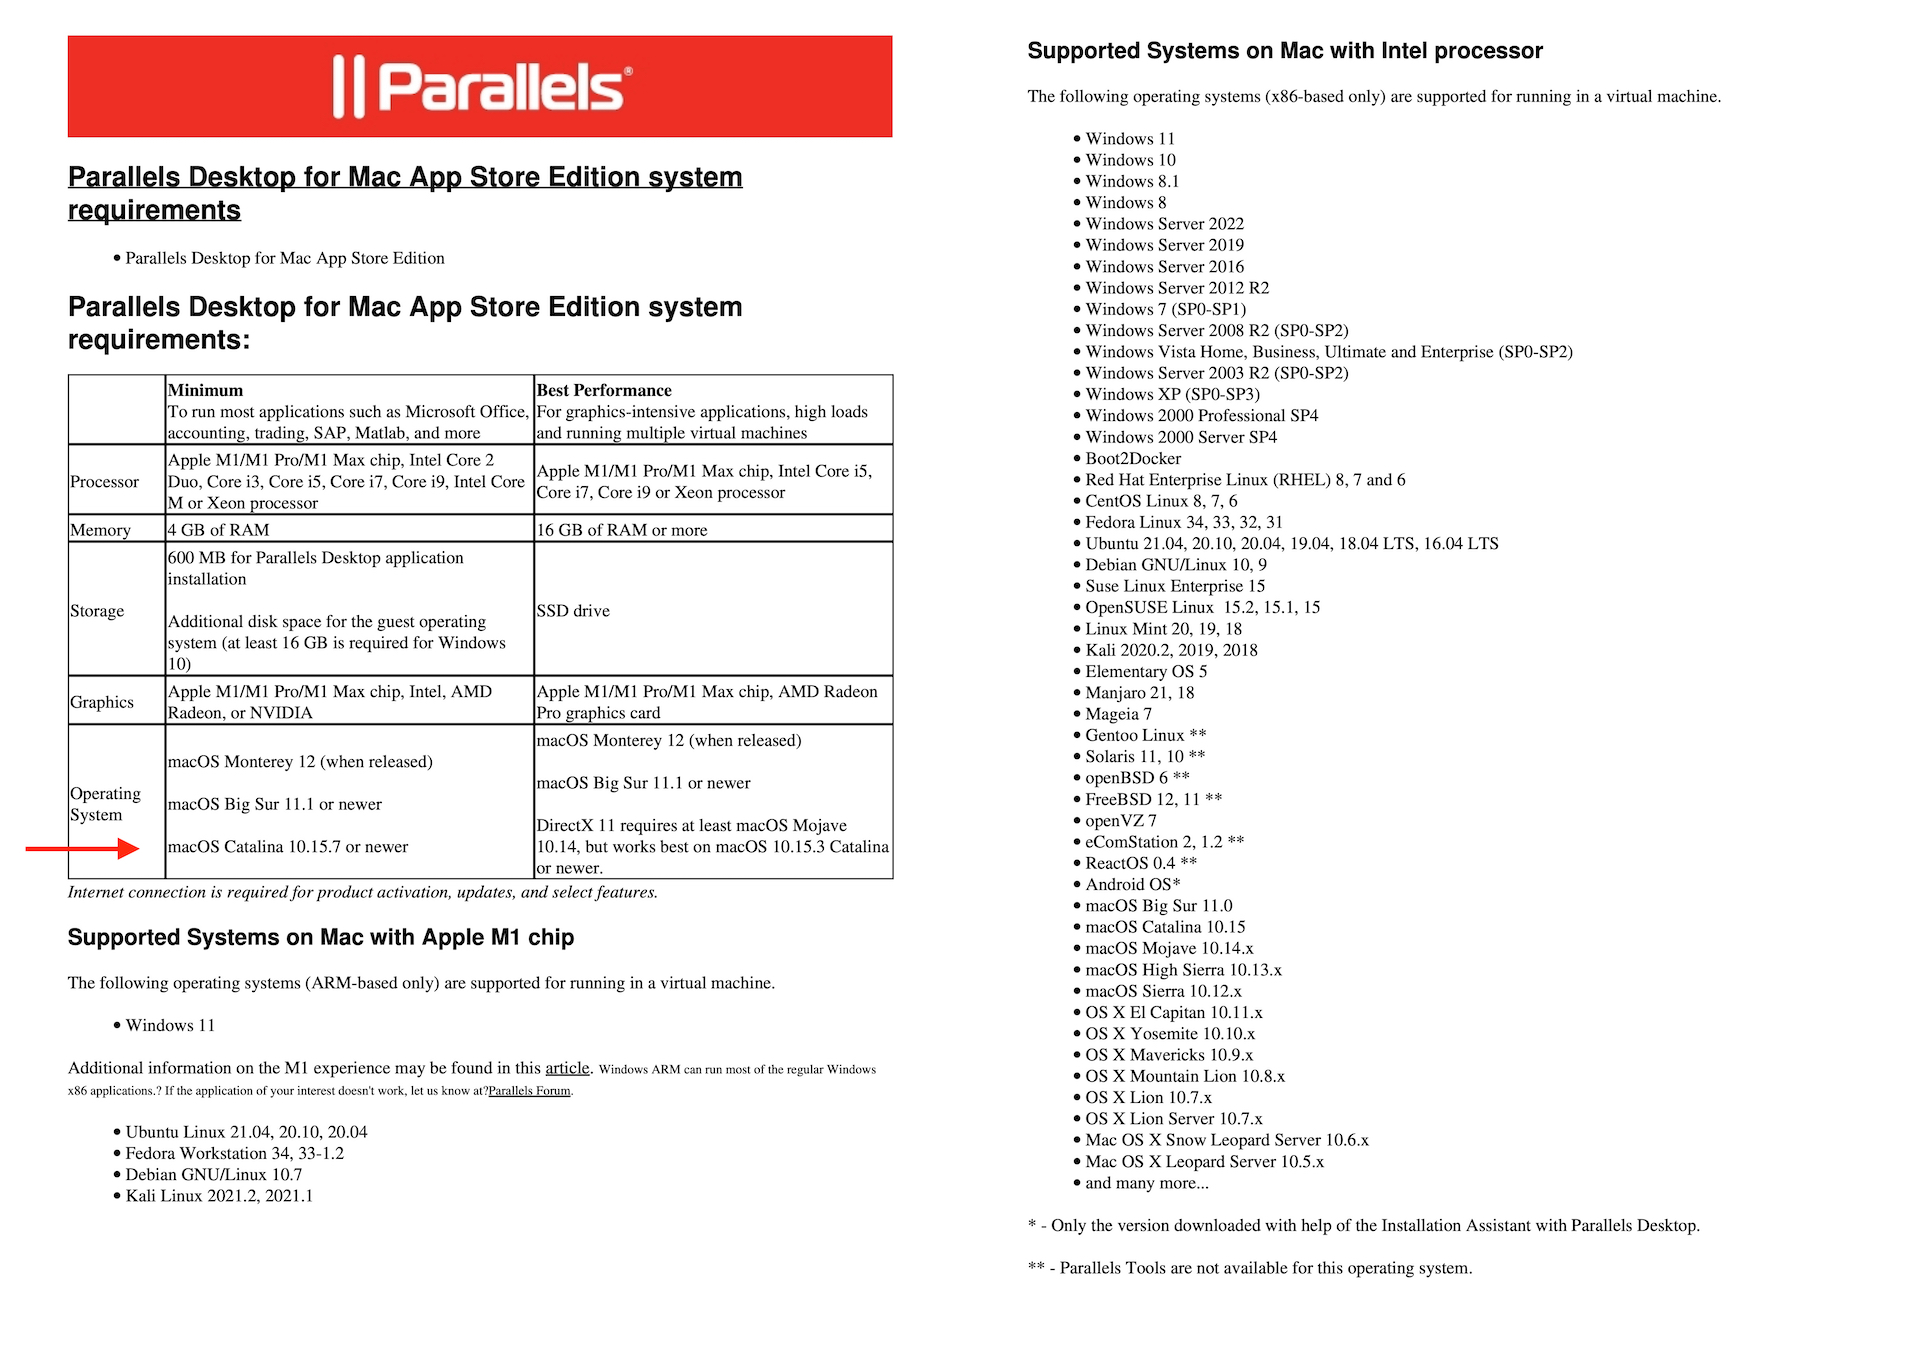 Parallels Desktop for Mac App Store Edition system requirements